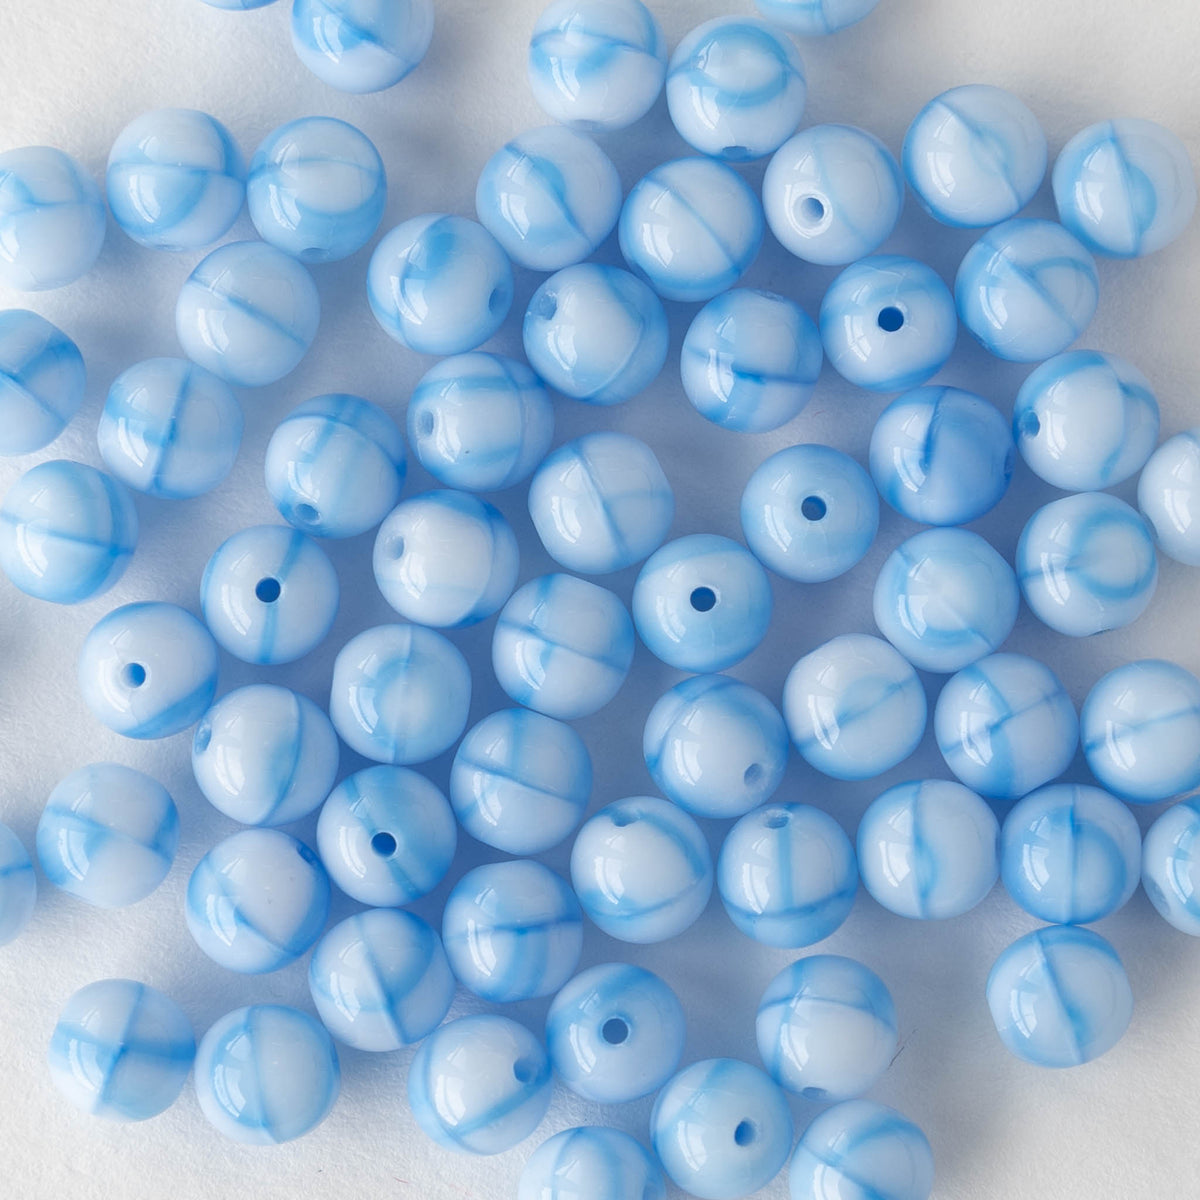 6mm Round Glass Beads - Lt Blue Marble - 50 Beads